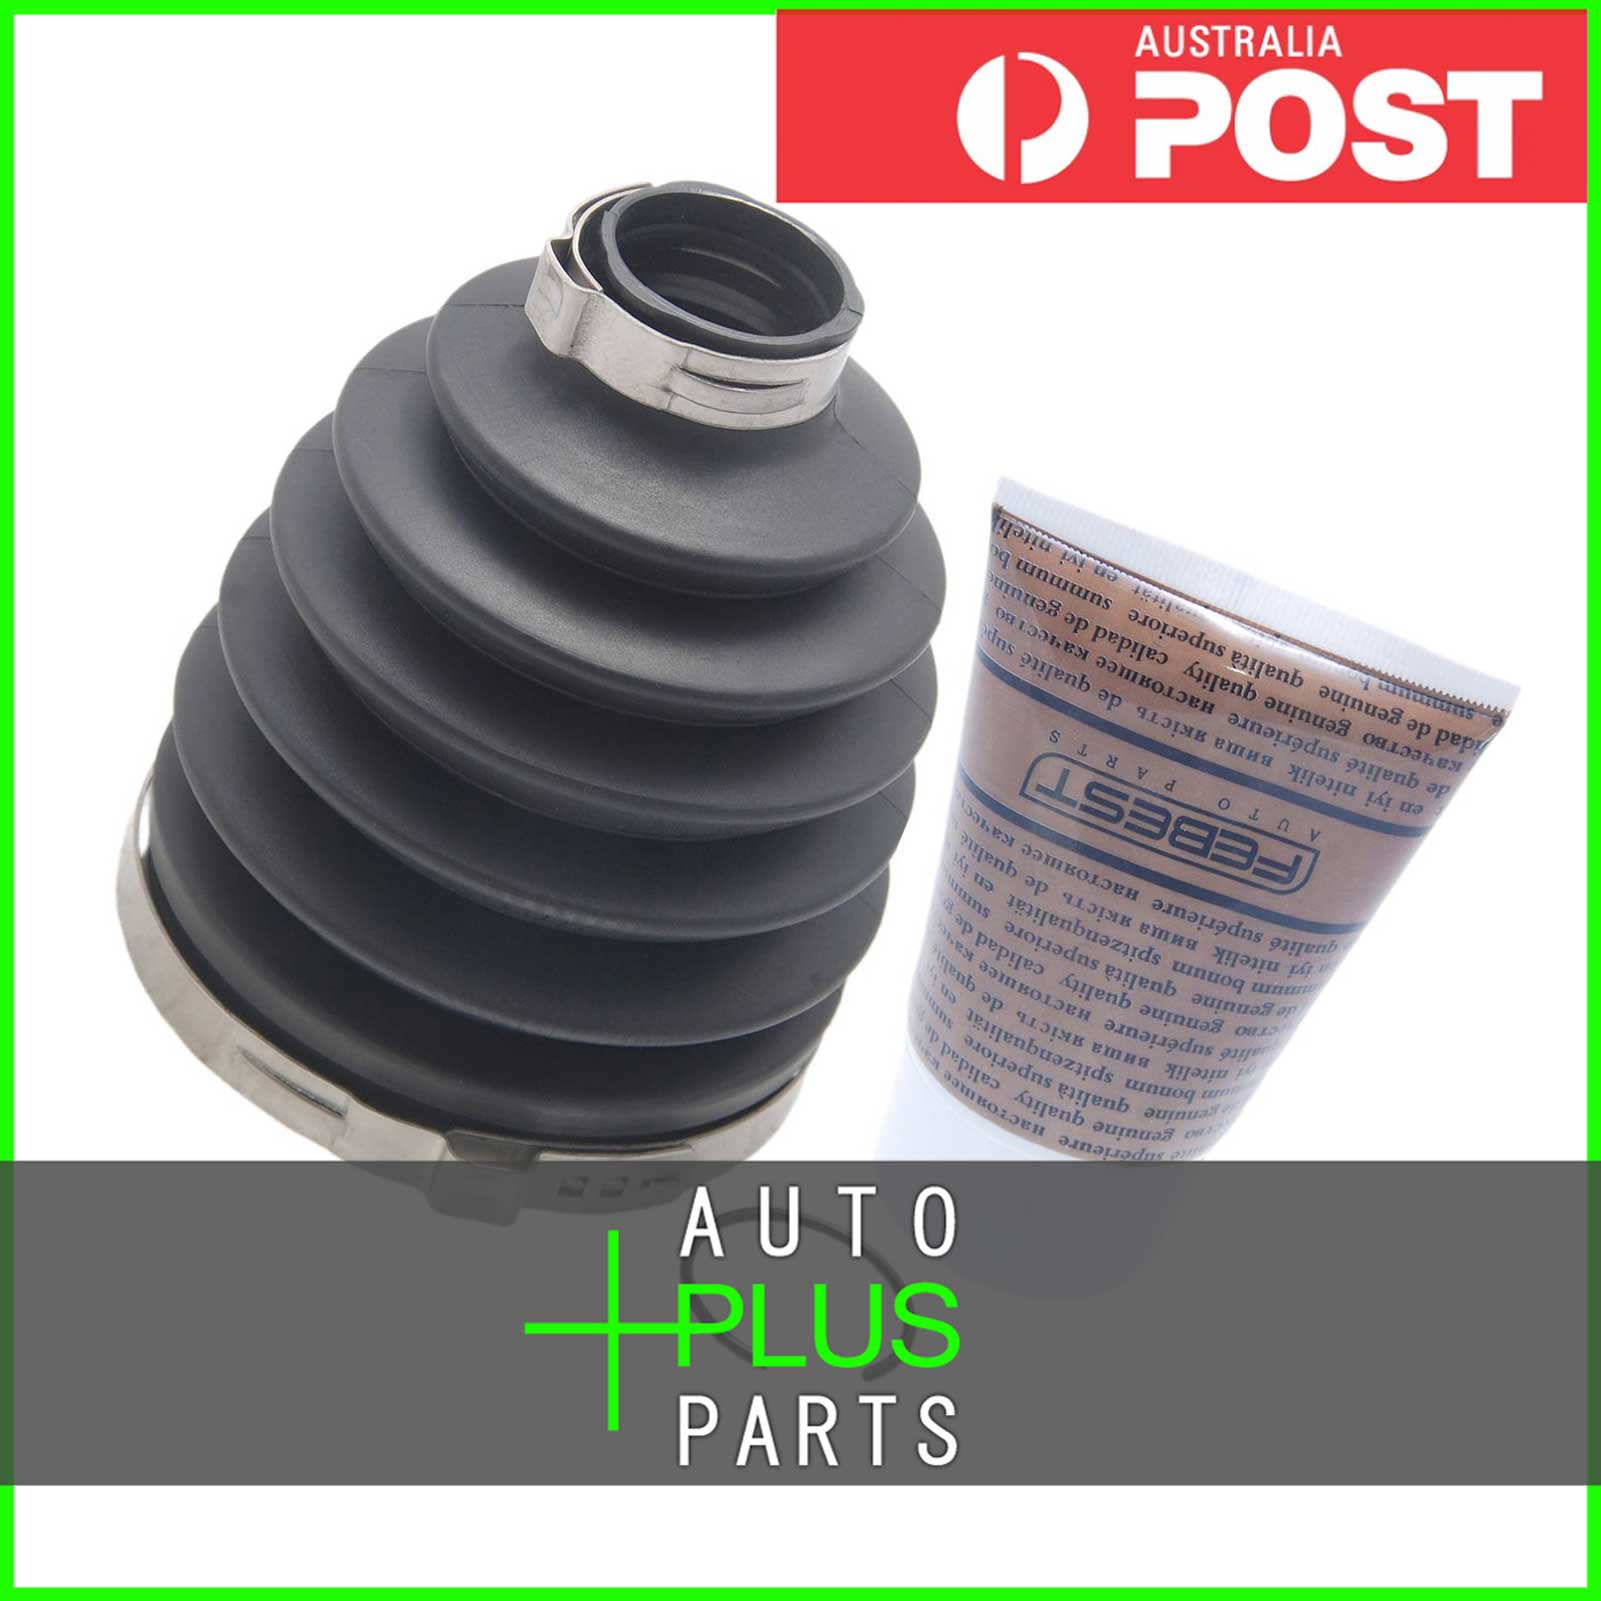 Fits LEXUS RX400H MHU38 4WD 2005-2008 - BOOT OUTER CV JOINT KIT 89X107X29 Product Photo